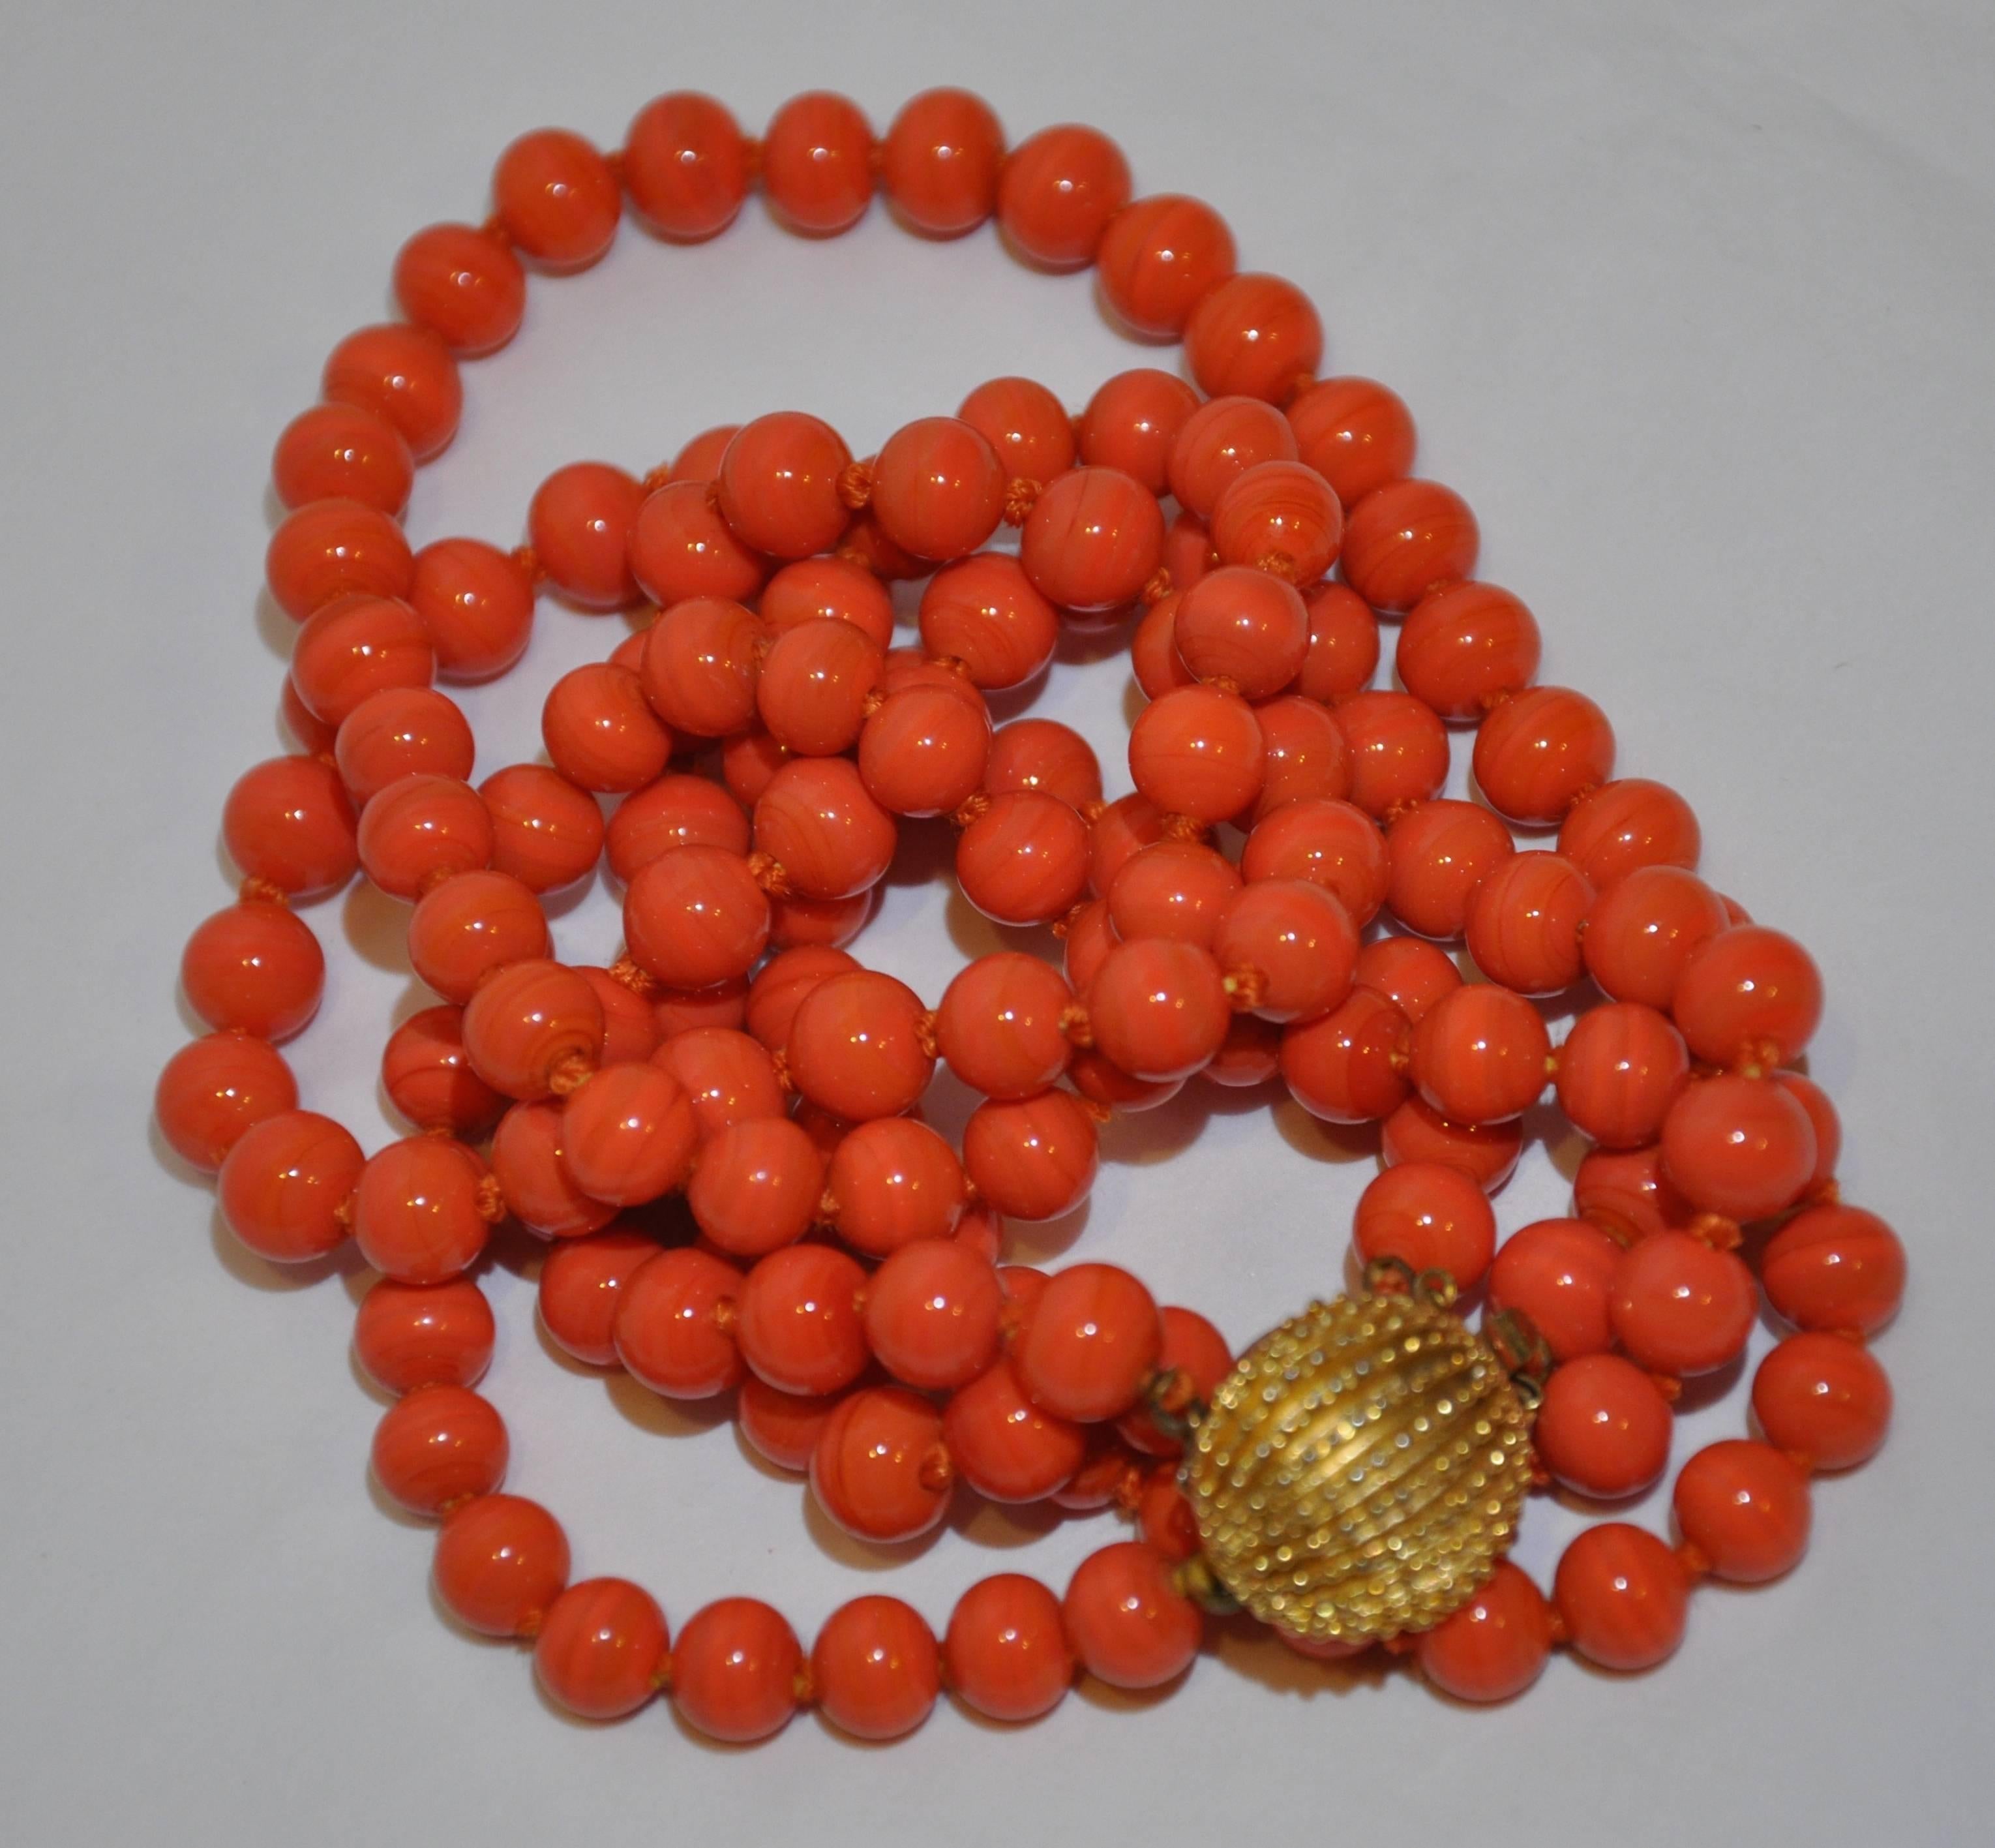        These wonderful natural coral double-strand necklace is hand-knotted accented with detailed engraved gold-tone closing. Of the two strands, one measures 22" in length with the longer strand measuring 24". The total length including